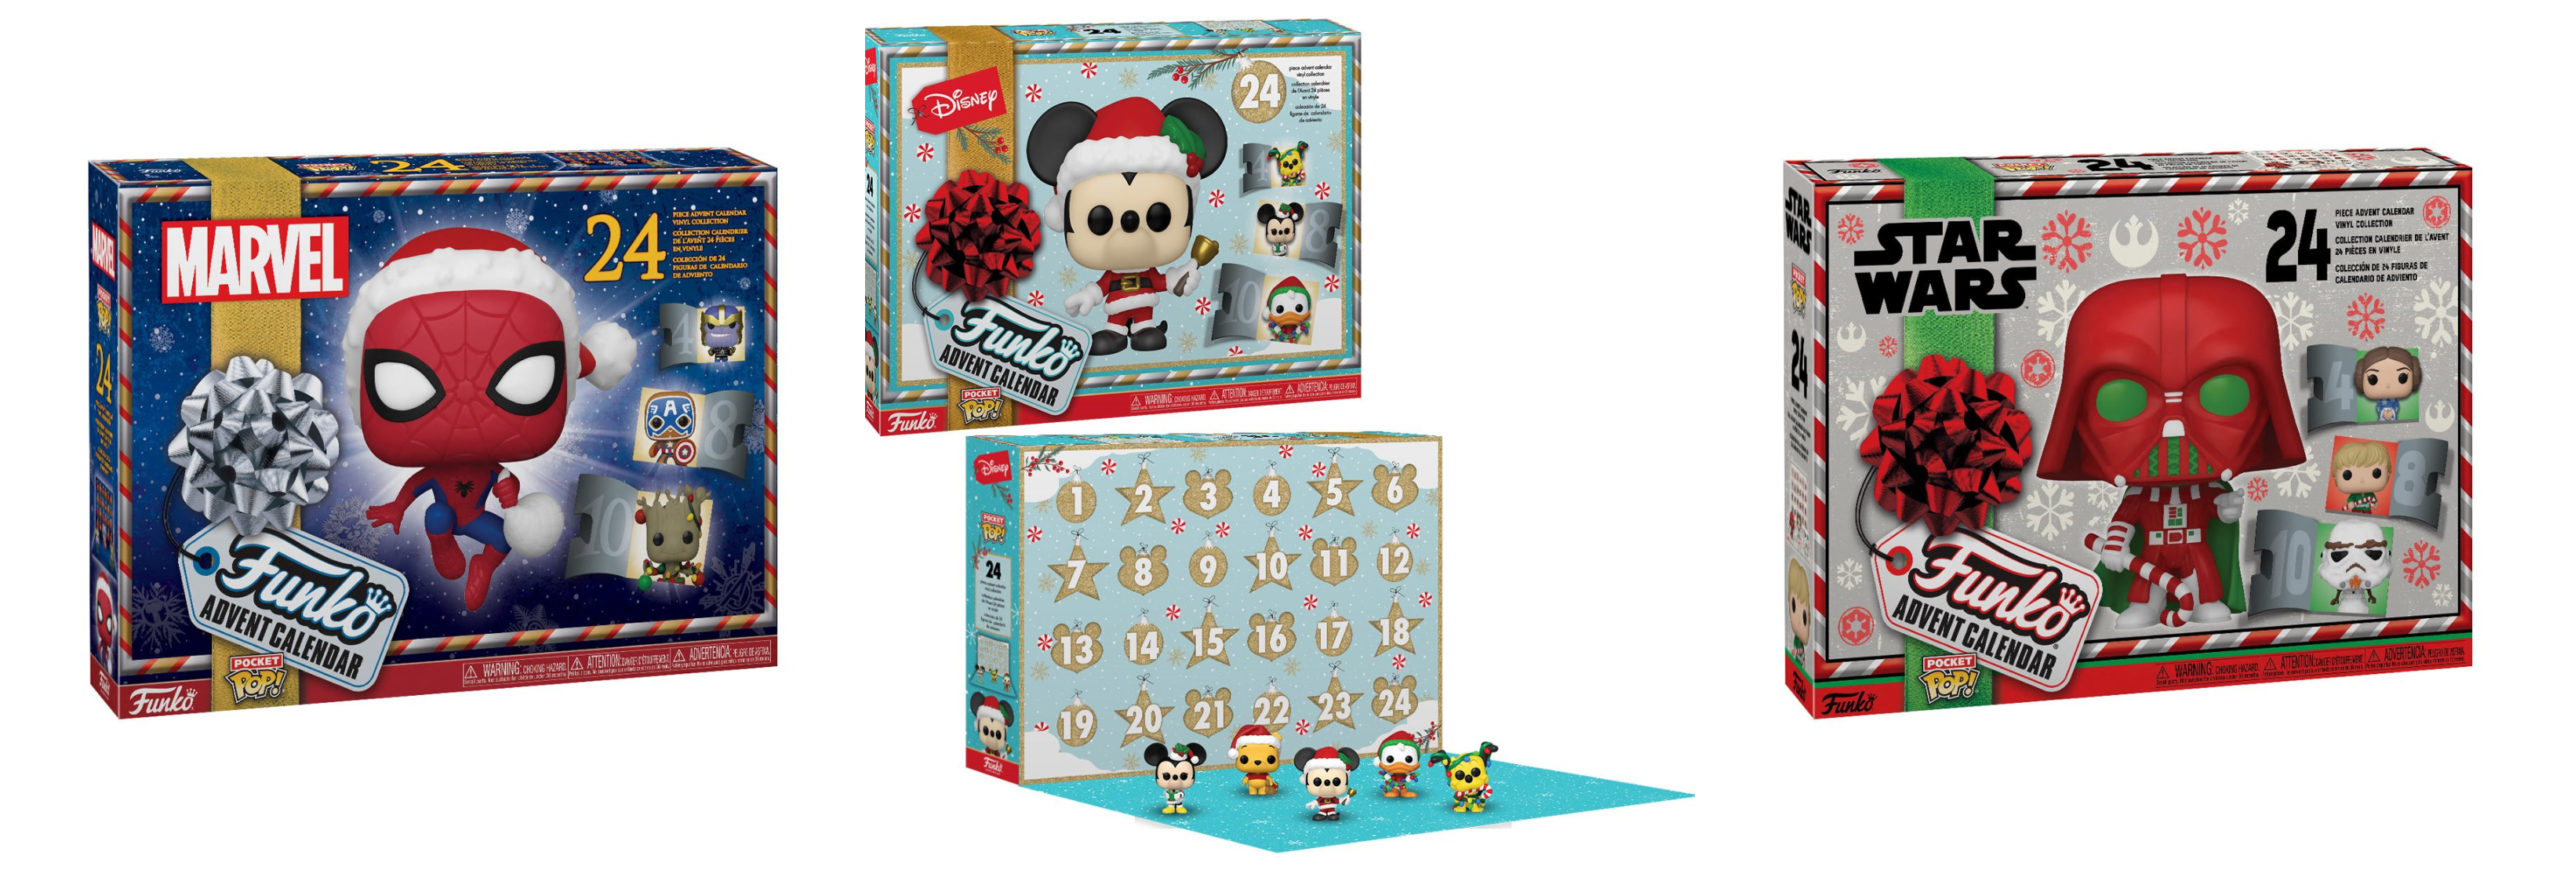 Funko Advent Calendars for Disney, Marvel, and Star Wars Now Available to  Preorder!